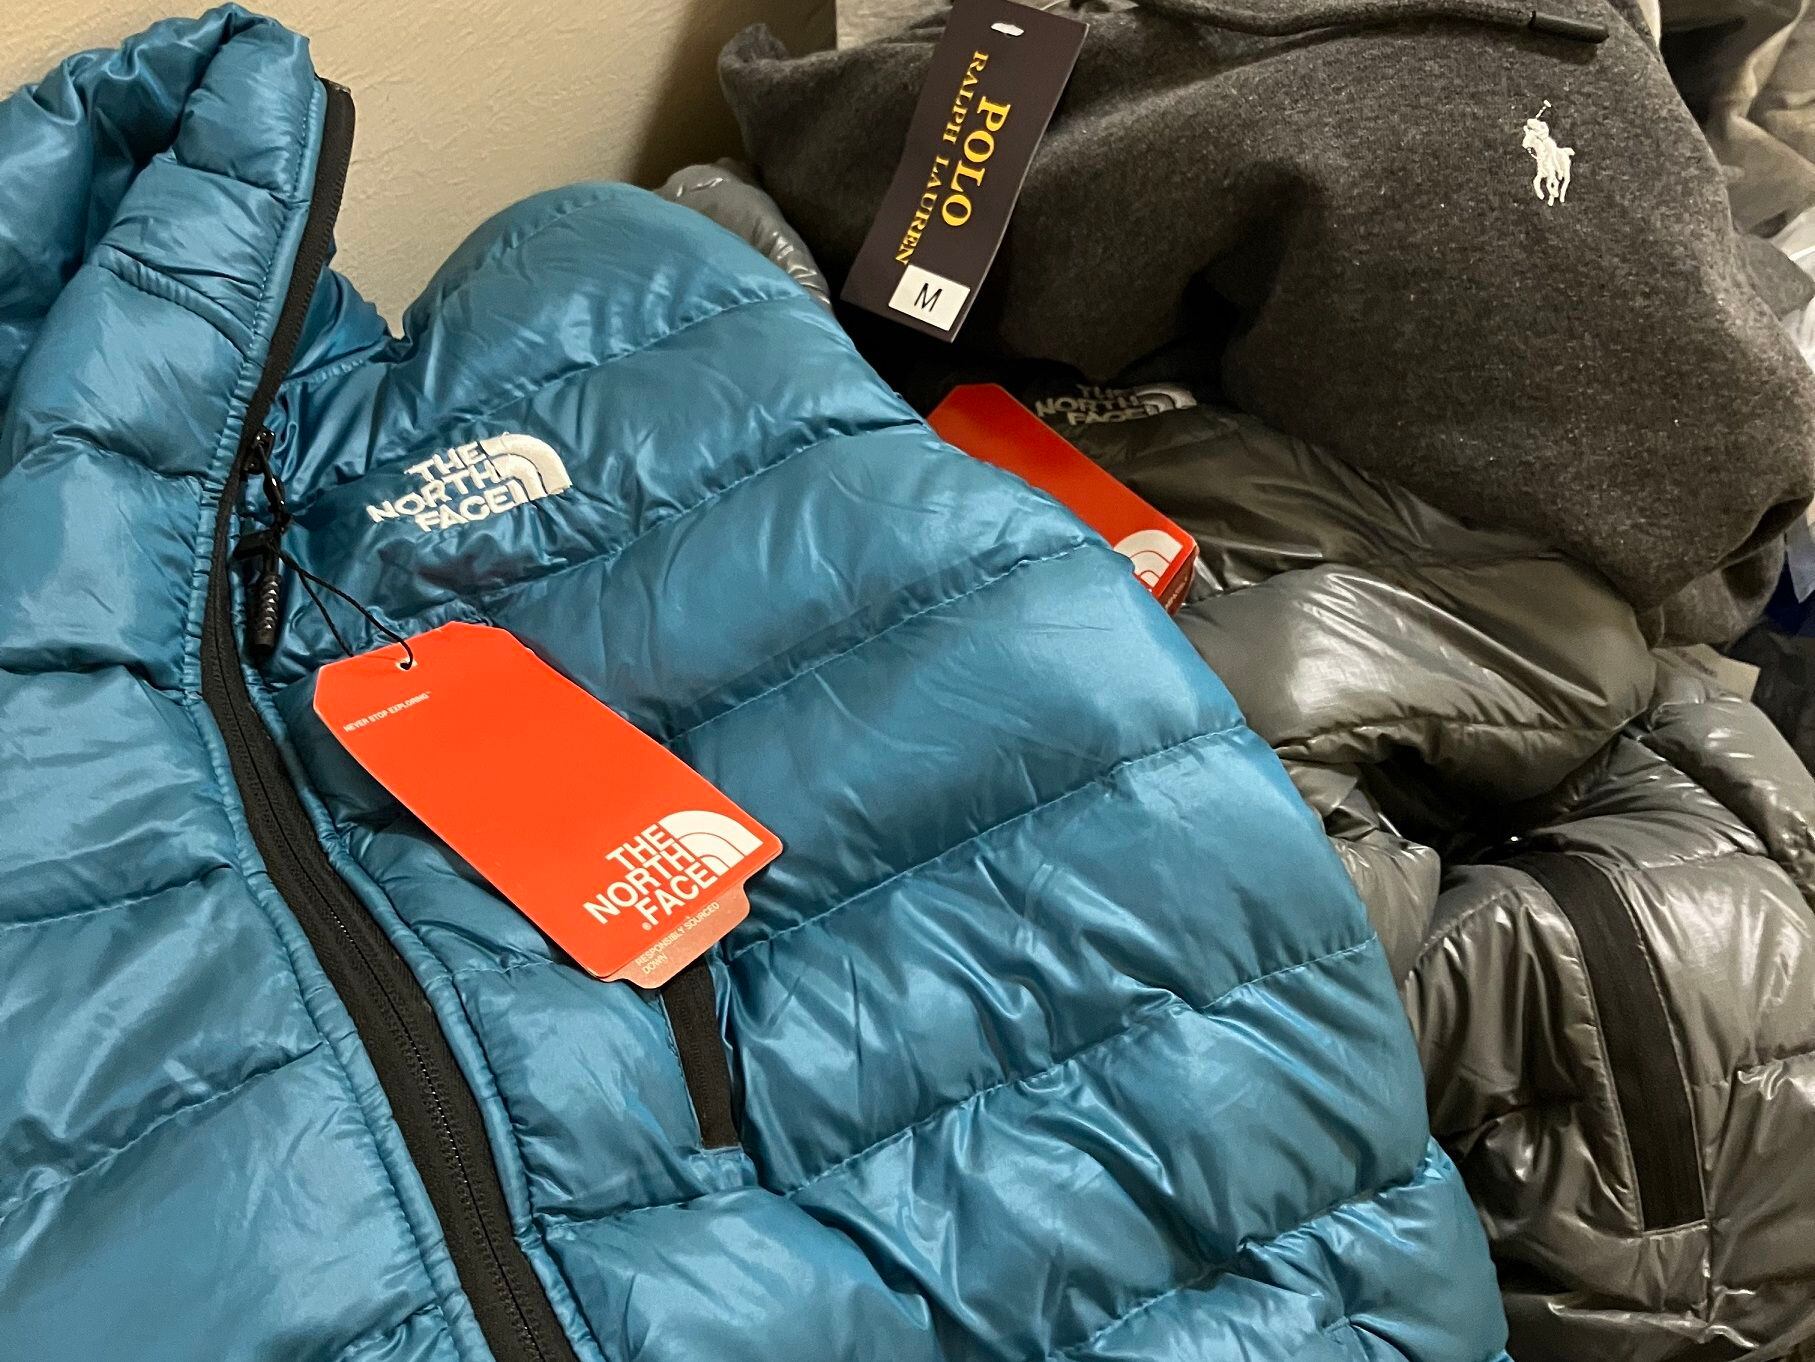 Fake North Face clothing worth £5,000 seized from market stall